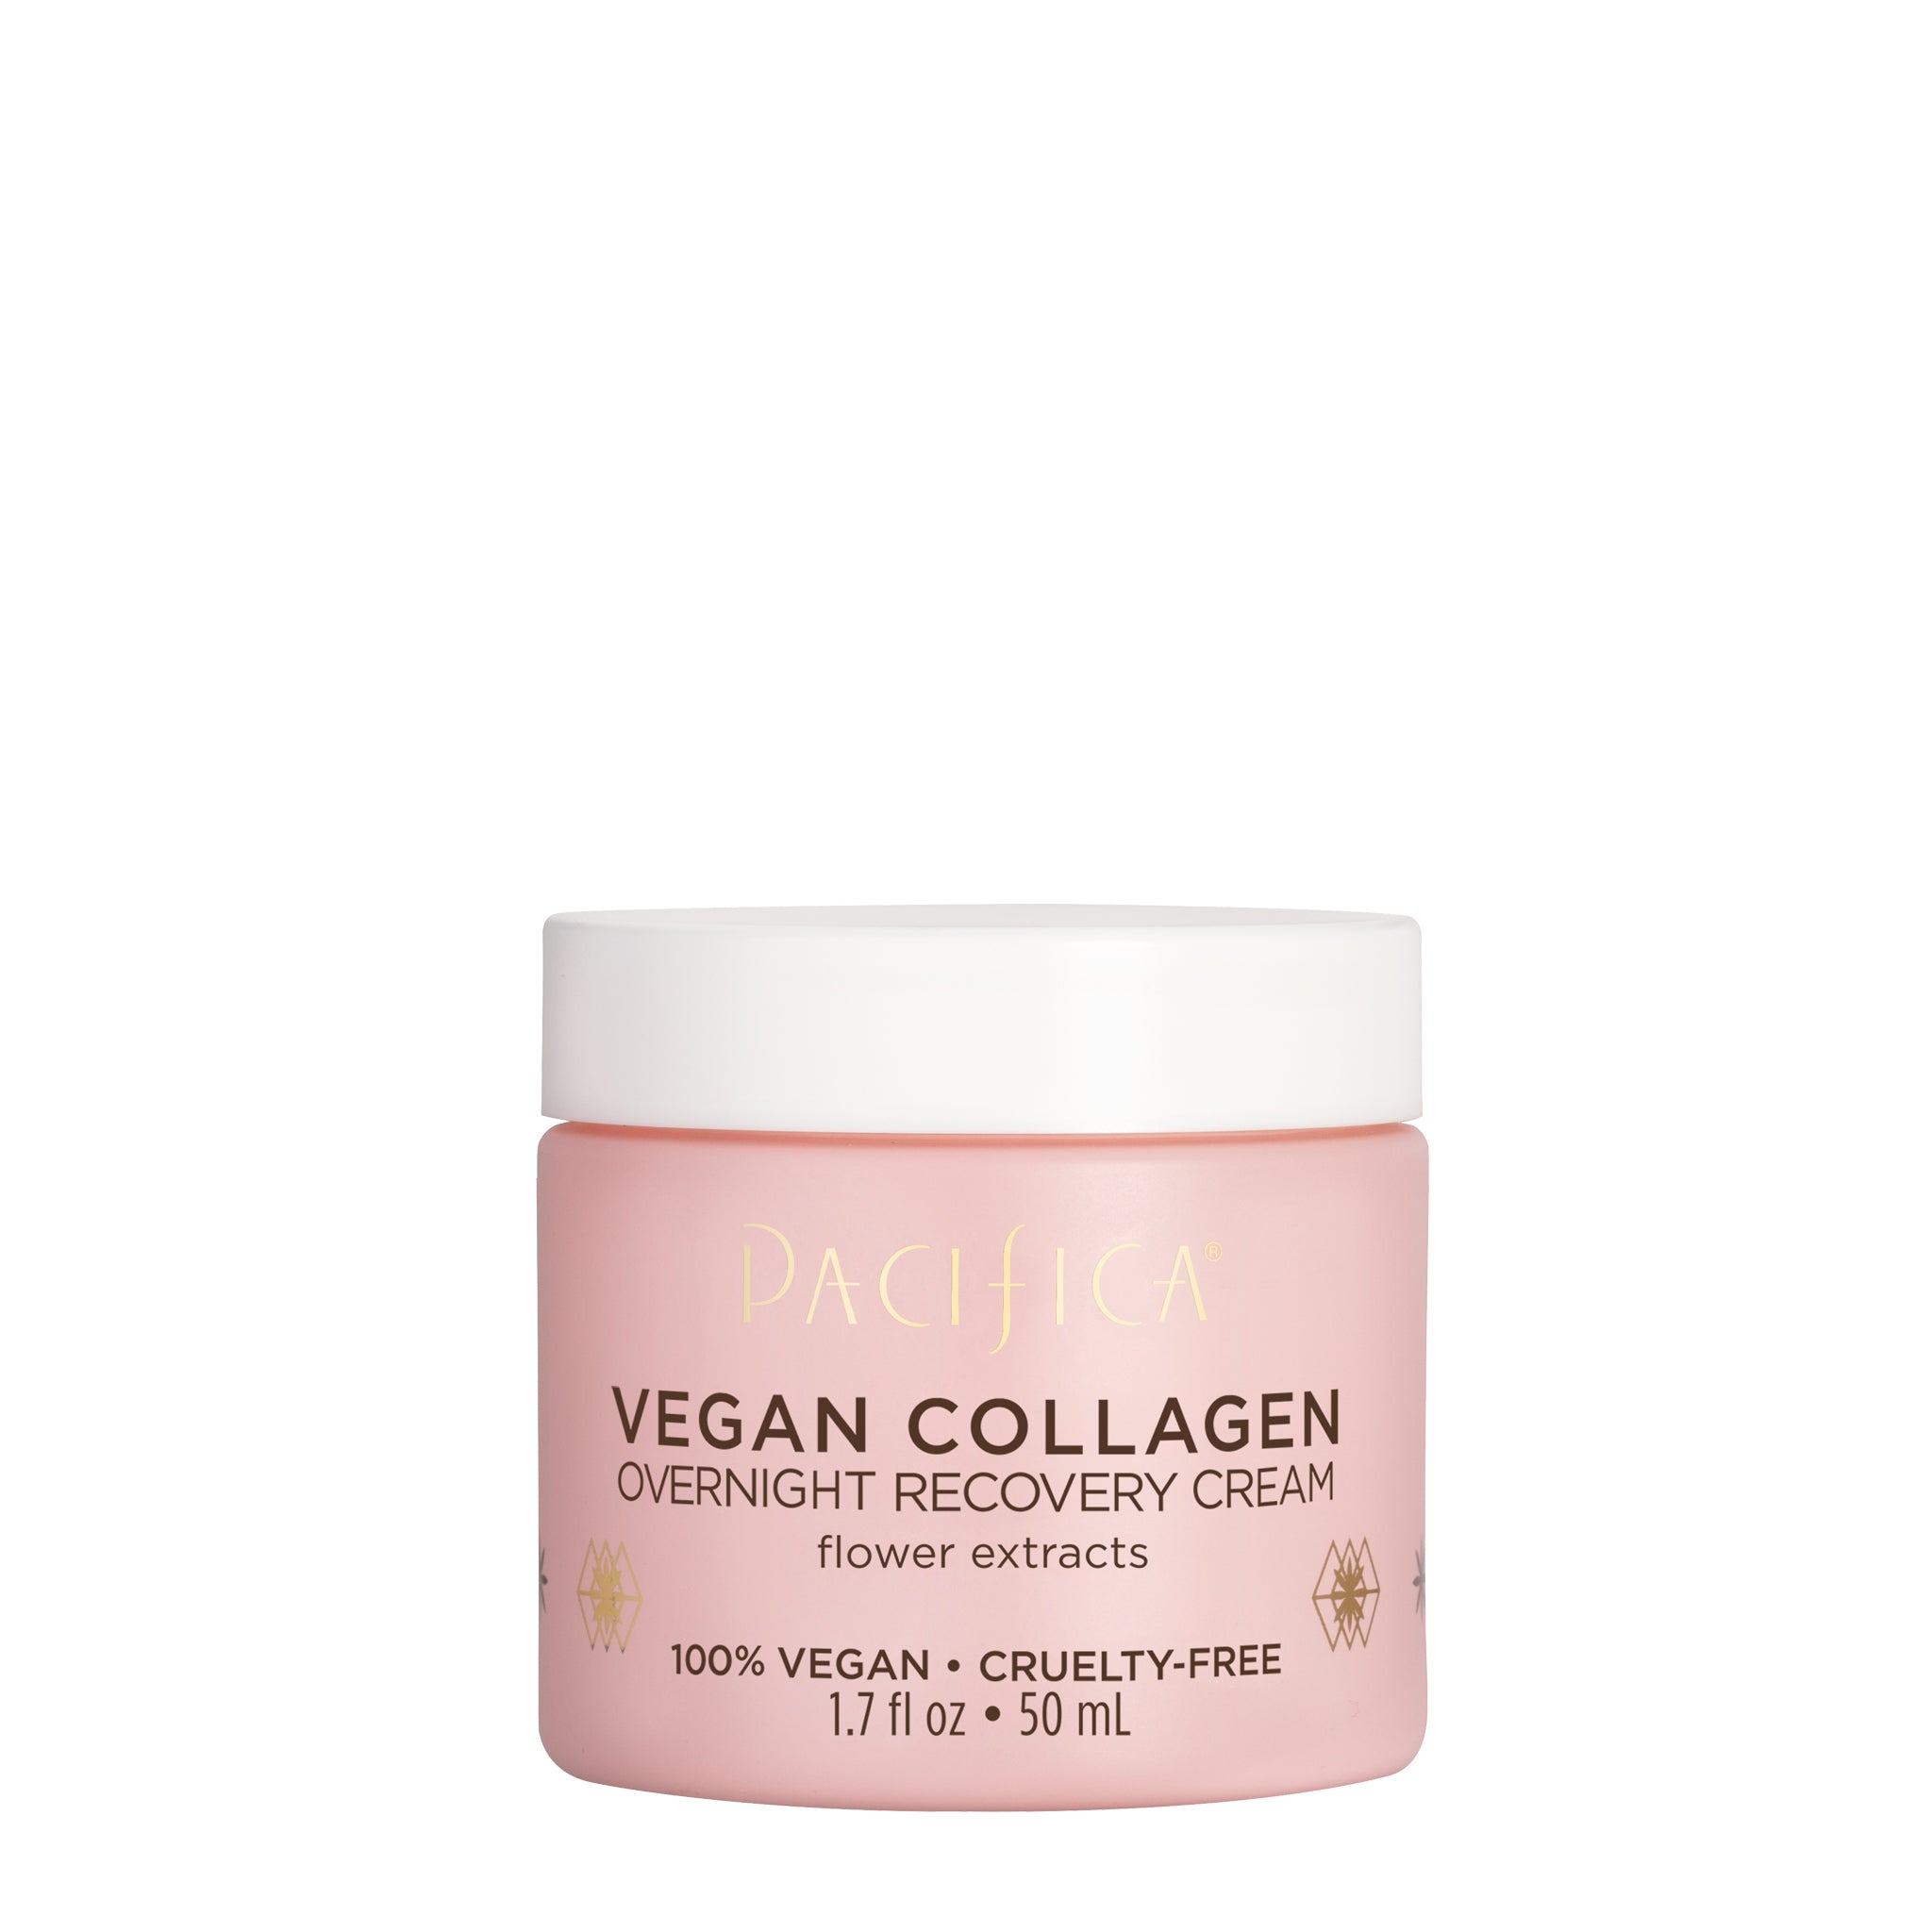 Vegan Collagen Overnight Recovery Cream by Pacifica Beauty